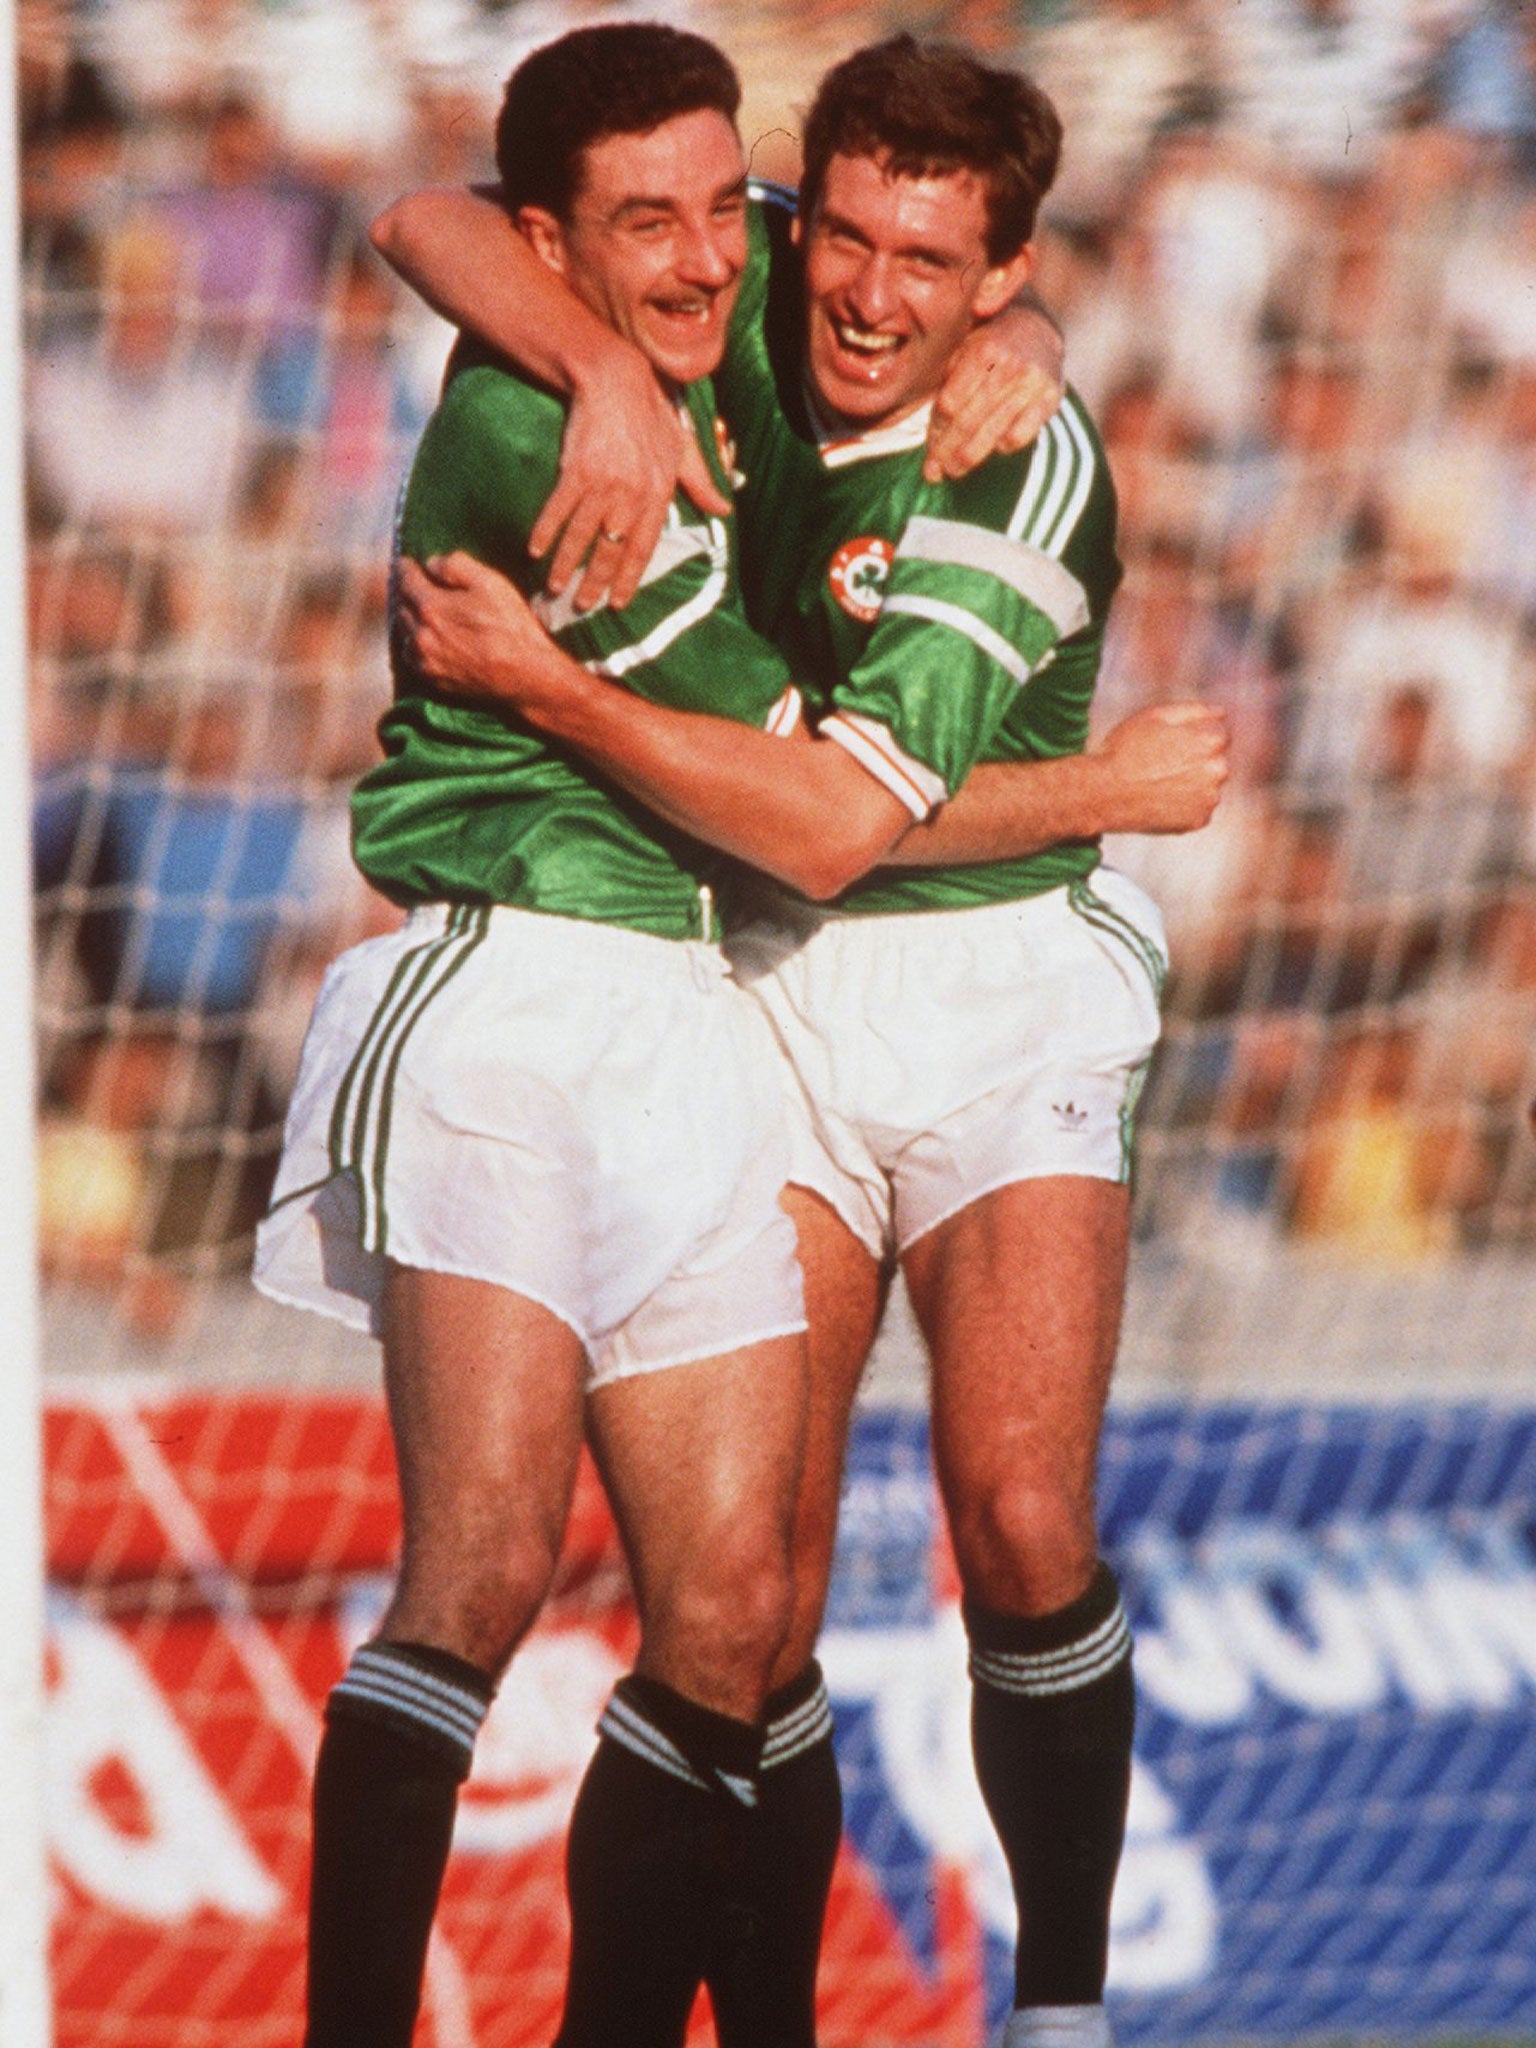 Kevin Sheedy, left, celebrates an Irish goal with John Aldridge, right, as Kevin Moran comes to join the fun back in 1989